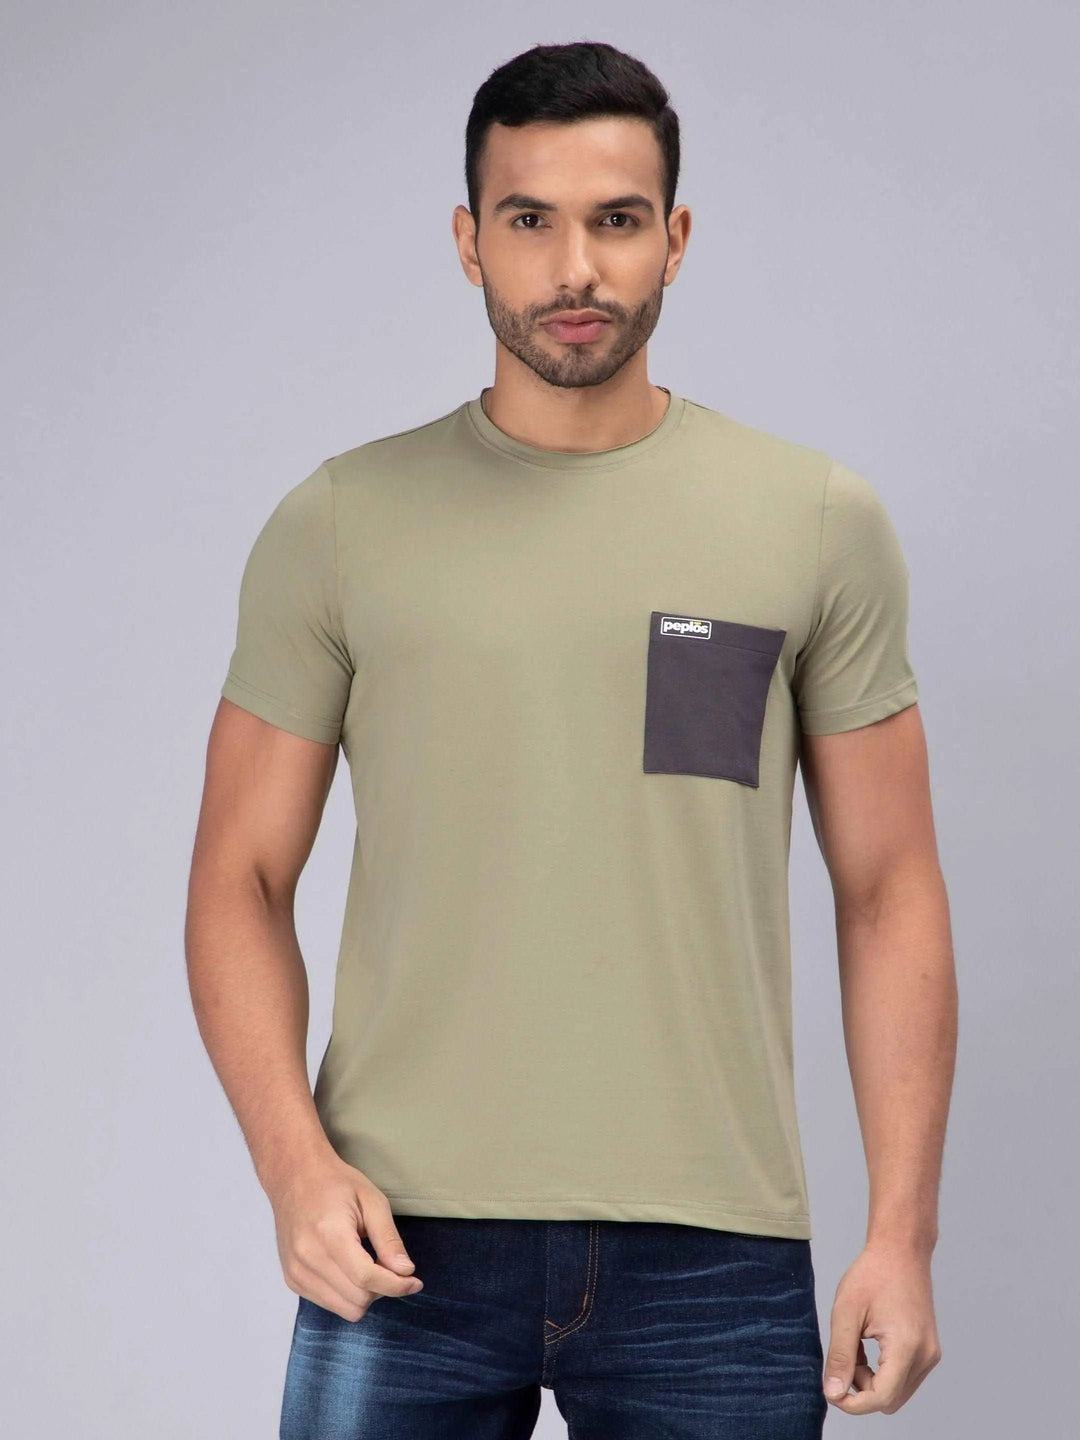 Men's Half-Sleeve Solid Cotton T-shirt with Pocket-Grey - Peplos Jeans 